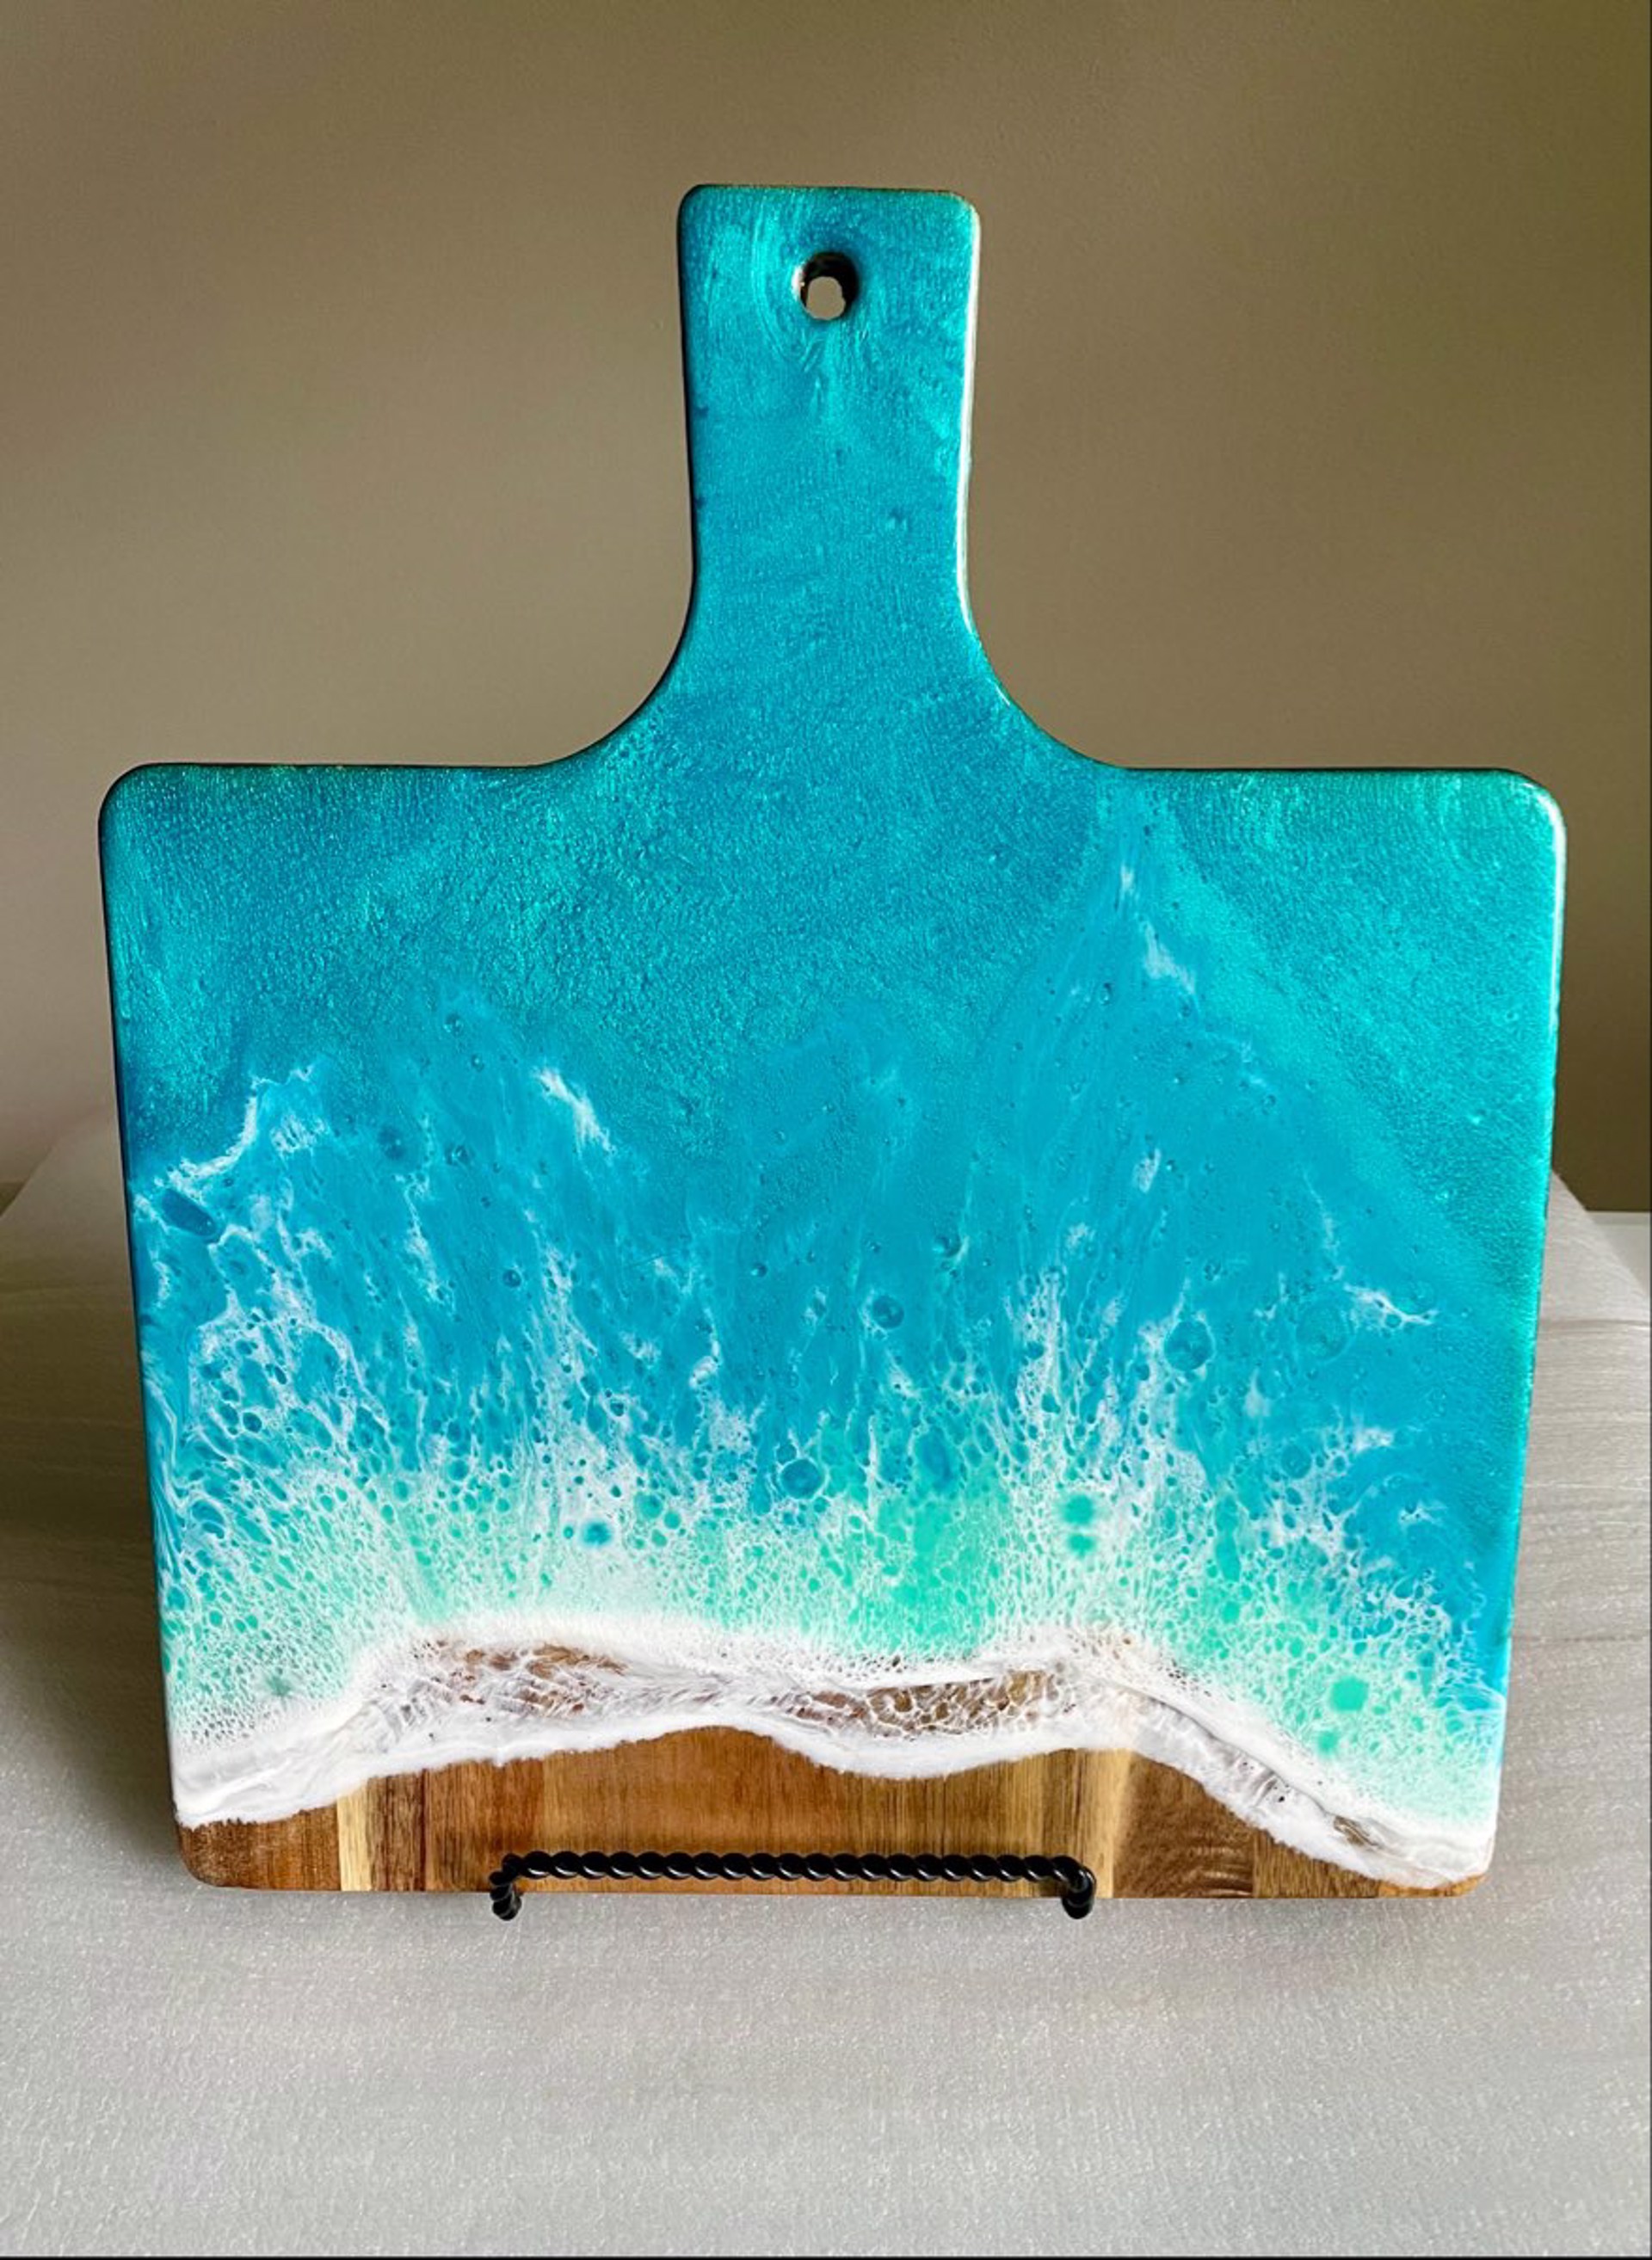 MDM22-26 Square Teal Resin and Wood Charcuterie Board by Mary Duke McCartt